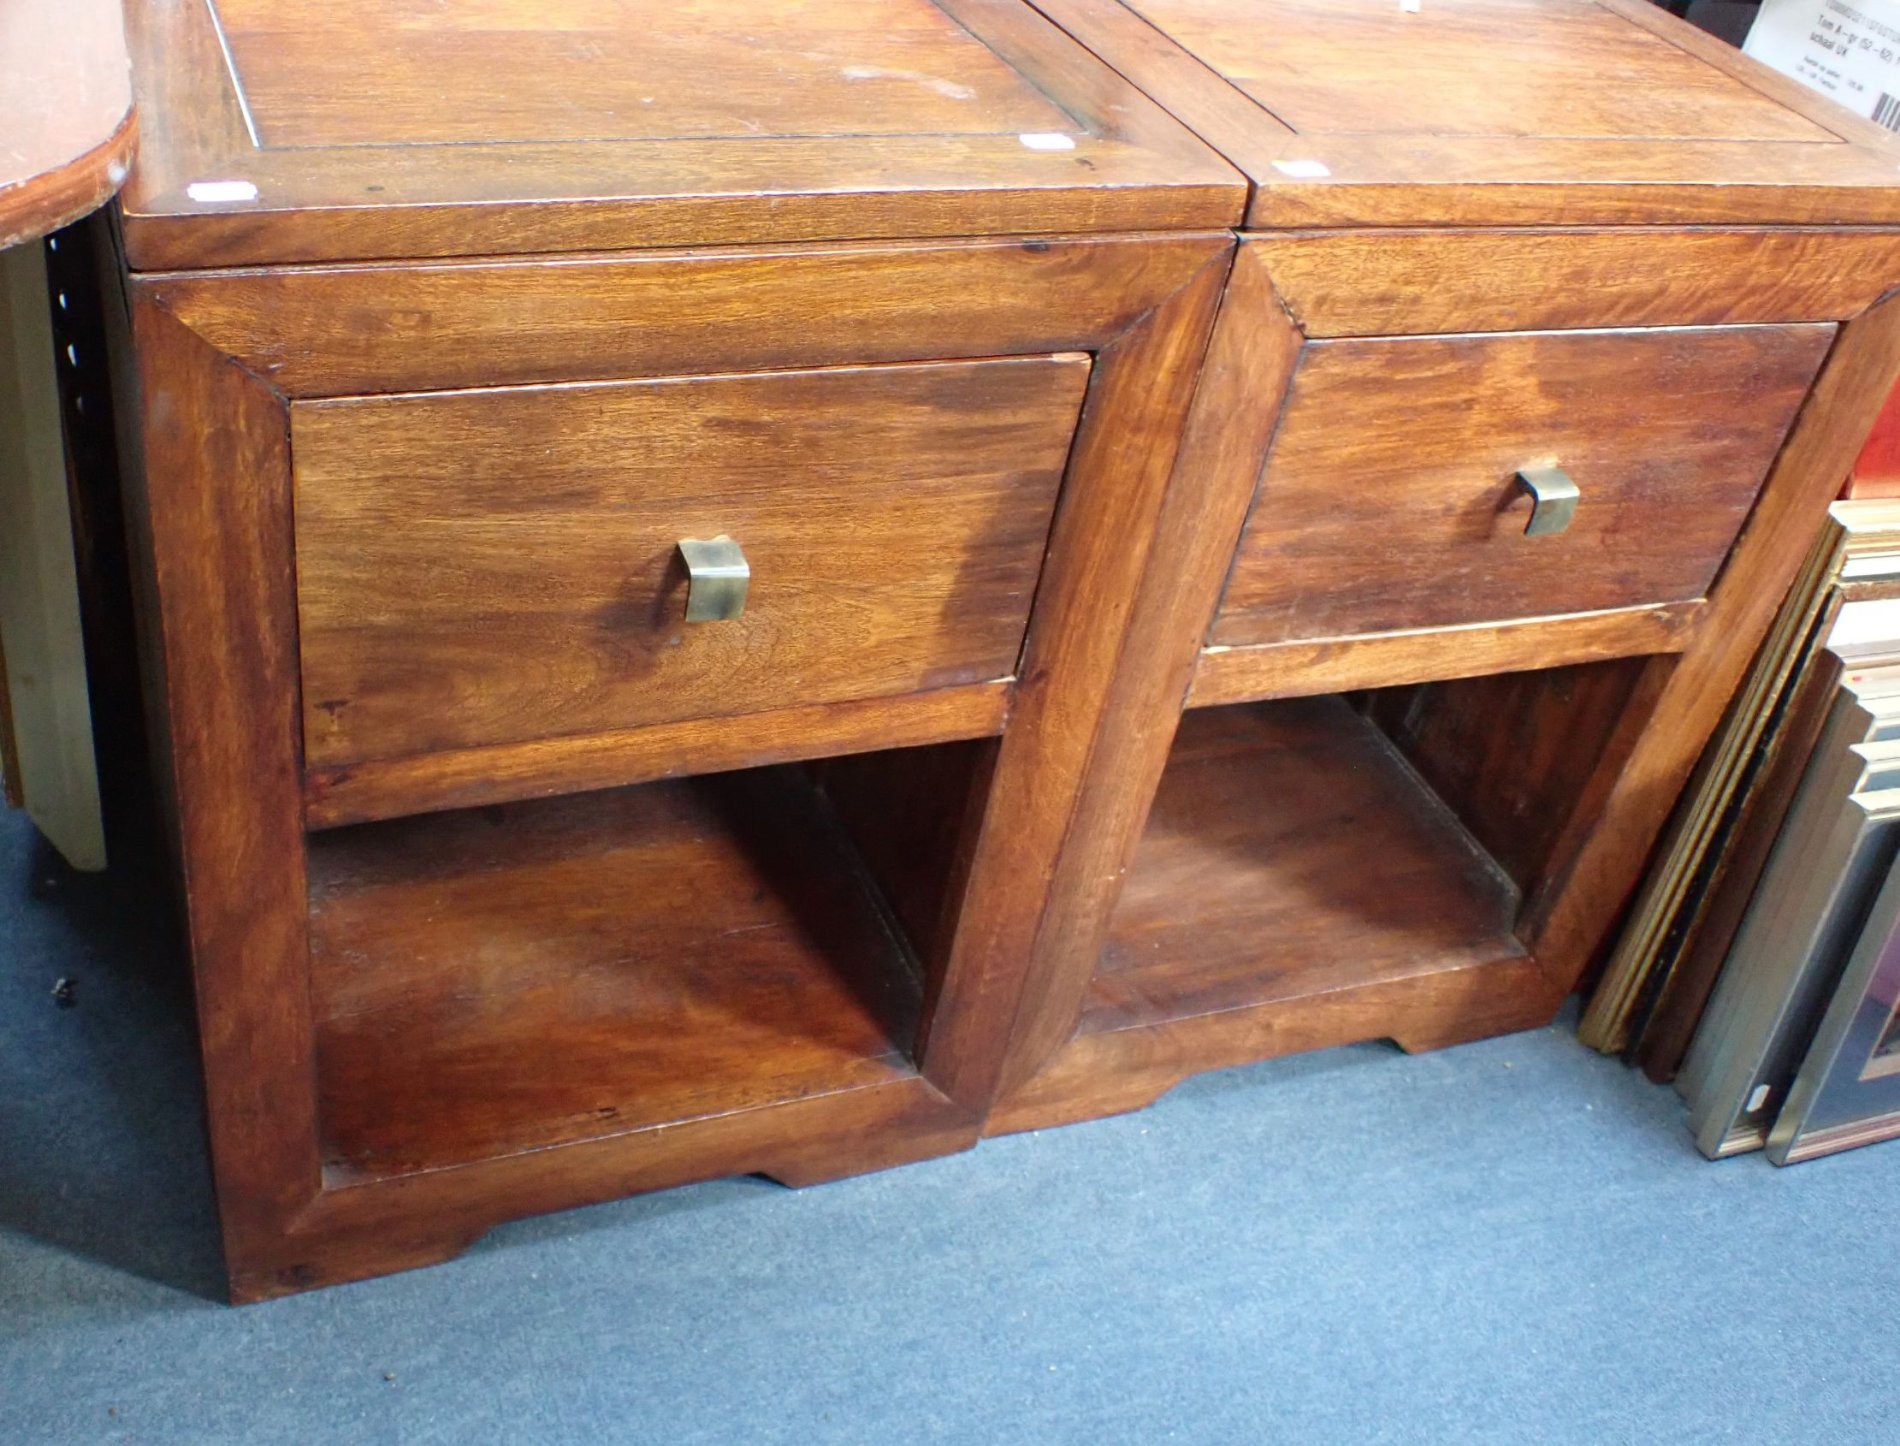 A PAIR OF HARDWOOD BEDSIDE CABINETS